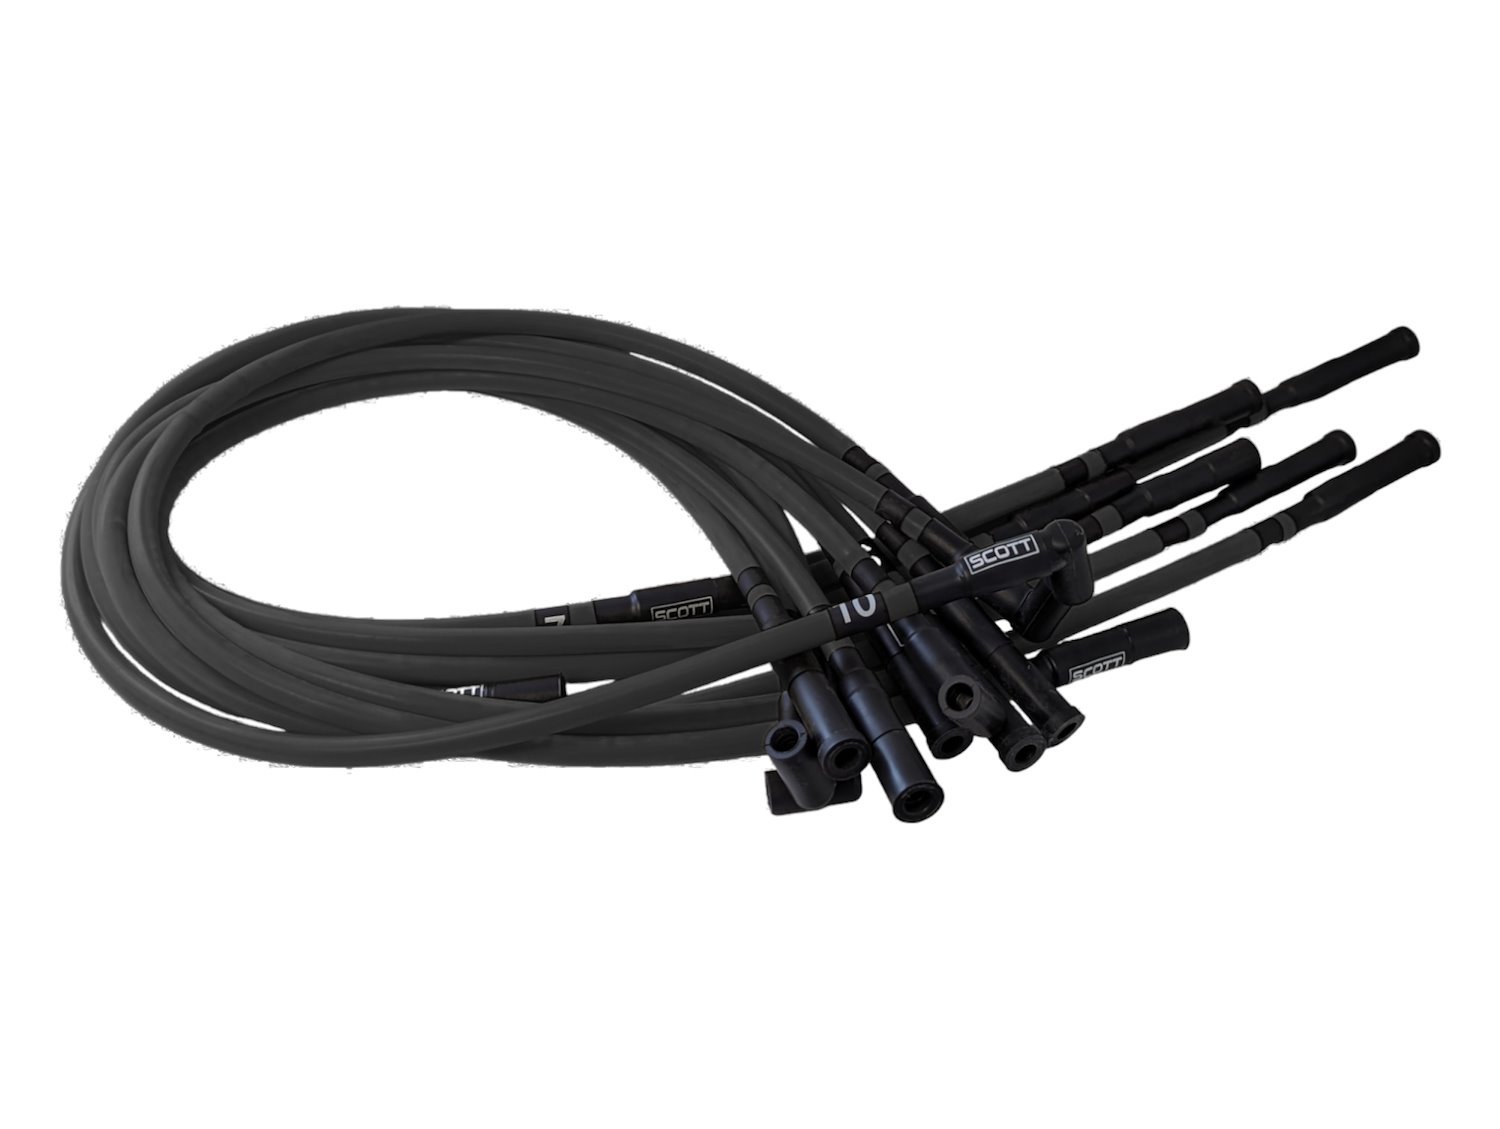 SPW-CH-690-I-1 High-Performance Silicone-Sleeved Spark Plug Wire Set for Dodge Viper (Gen-1) [Black]